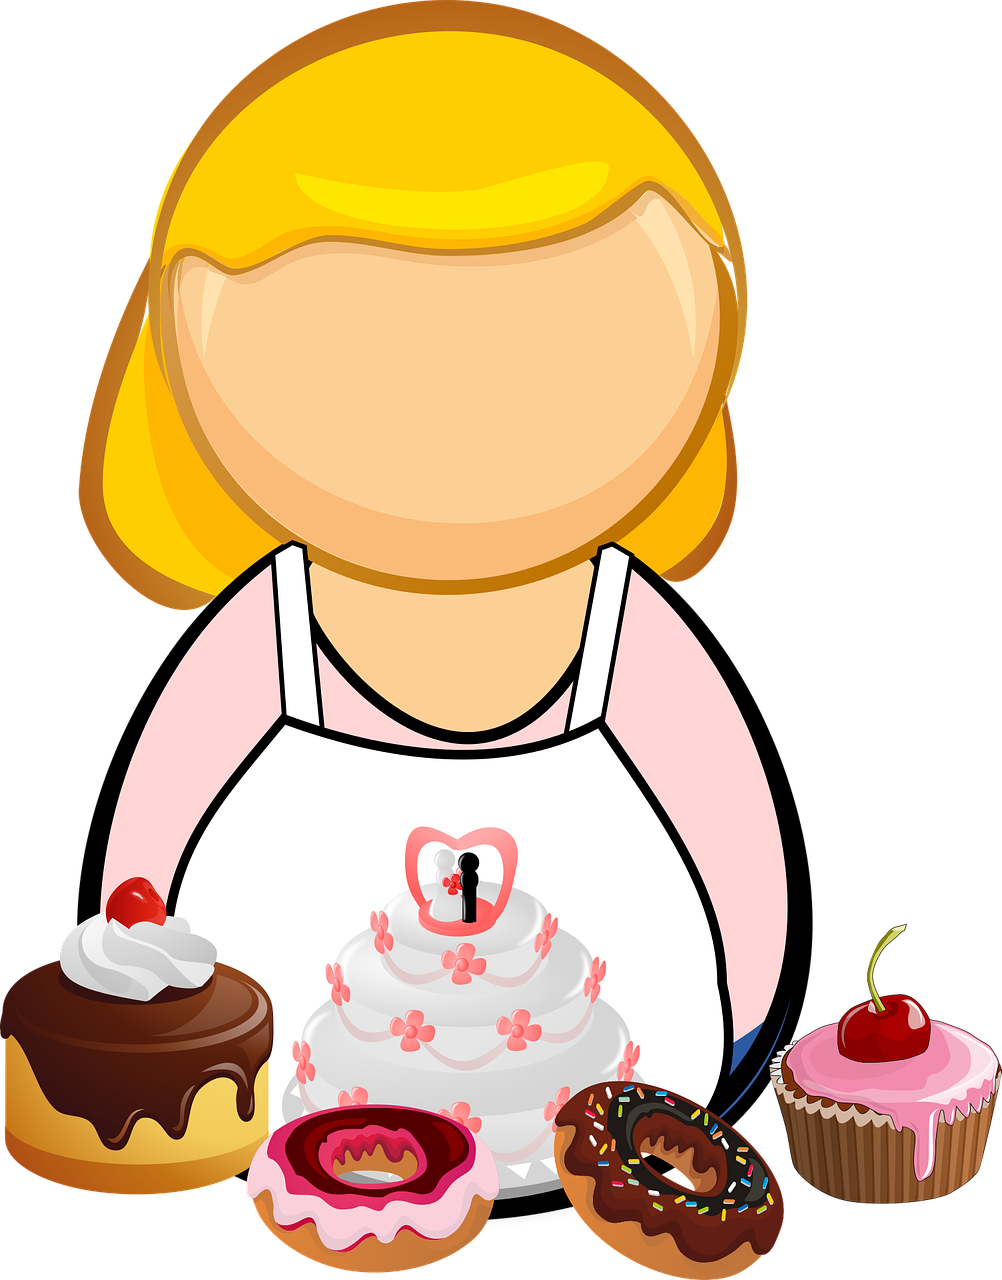 Animated Pastry Chef With Desserts PNG